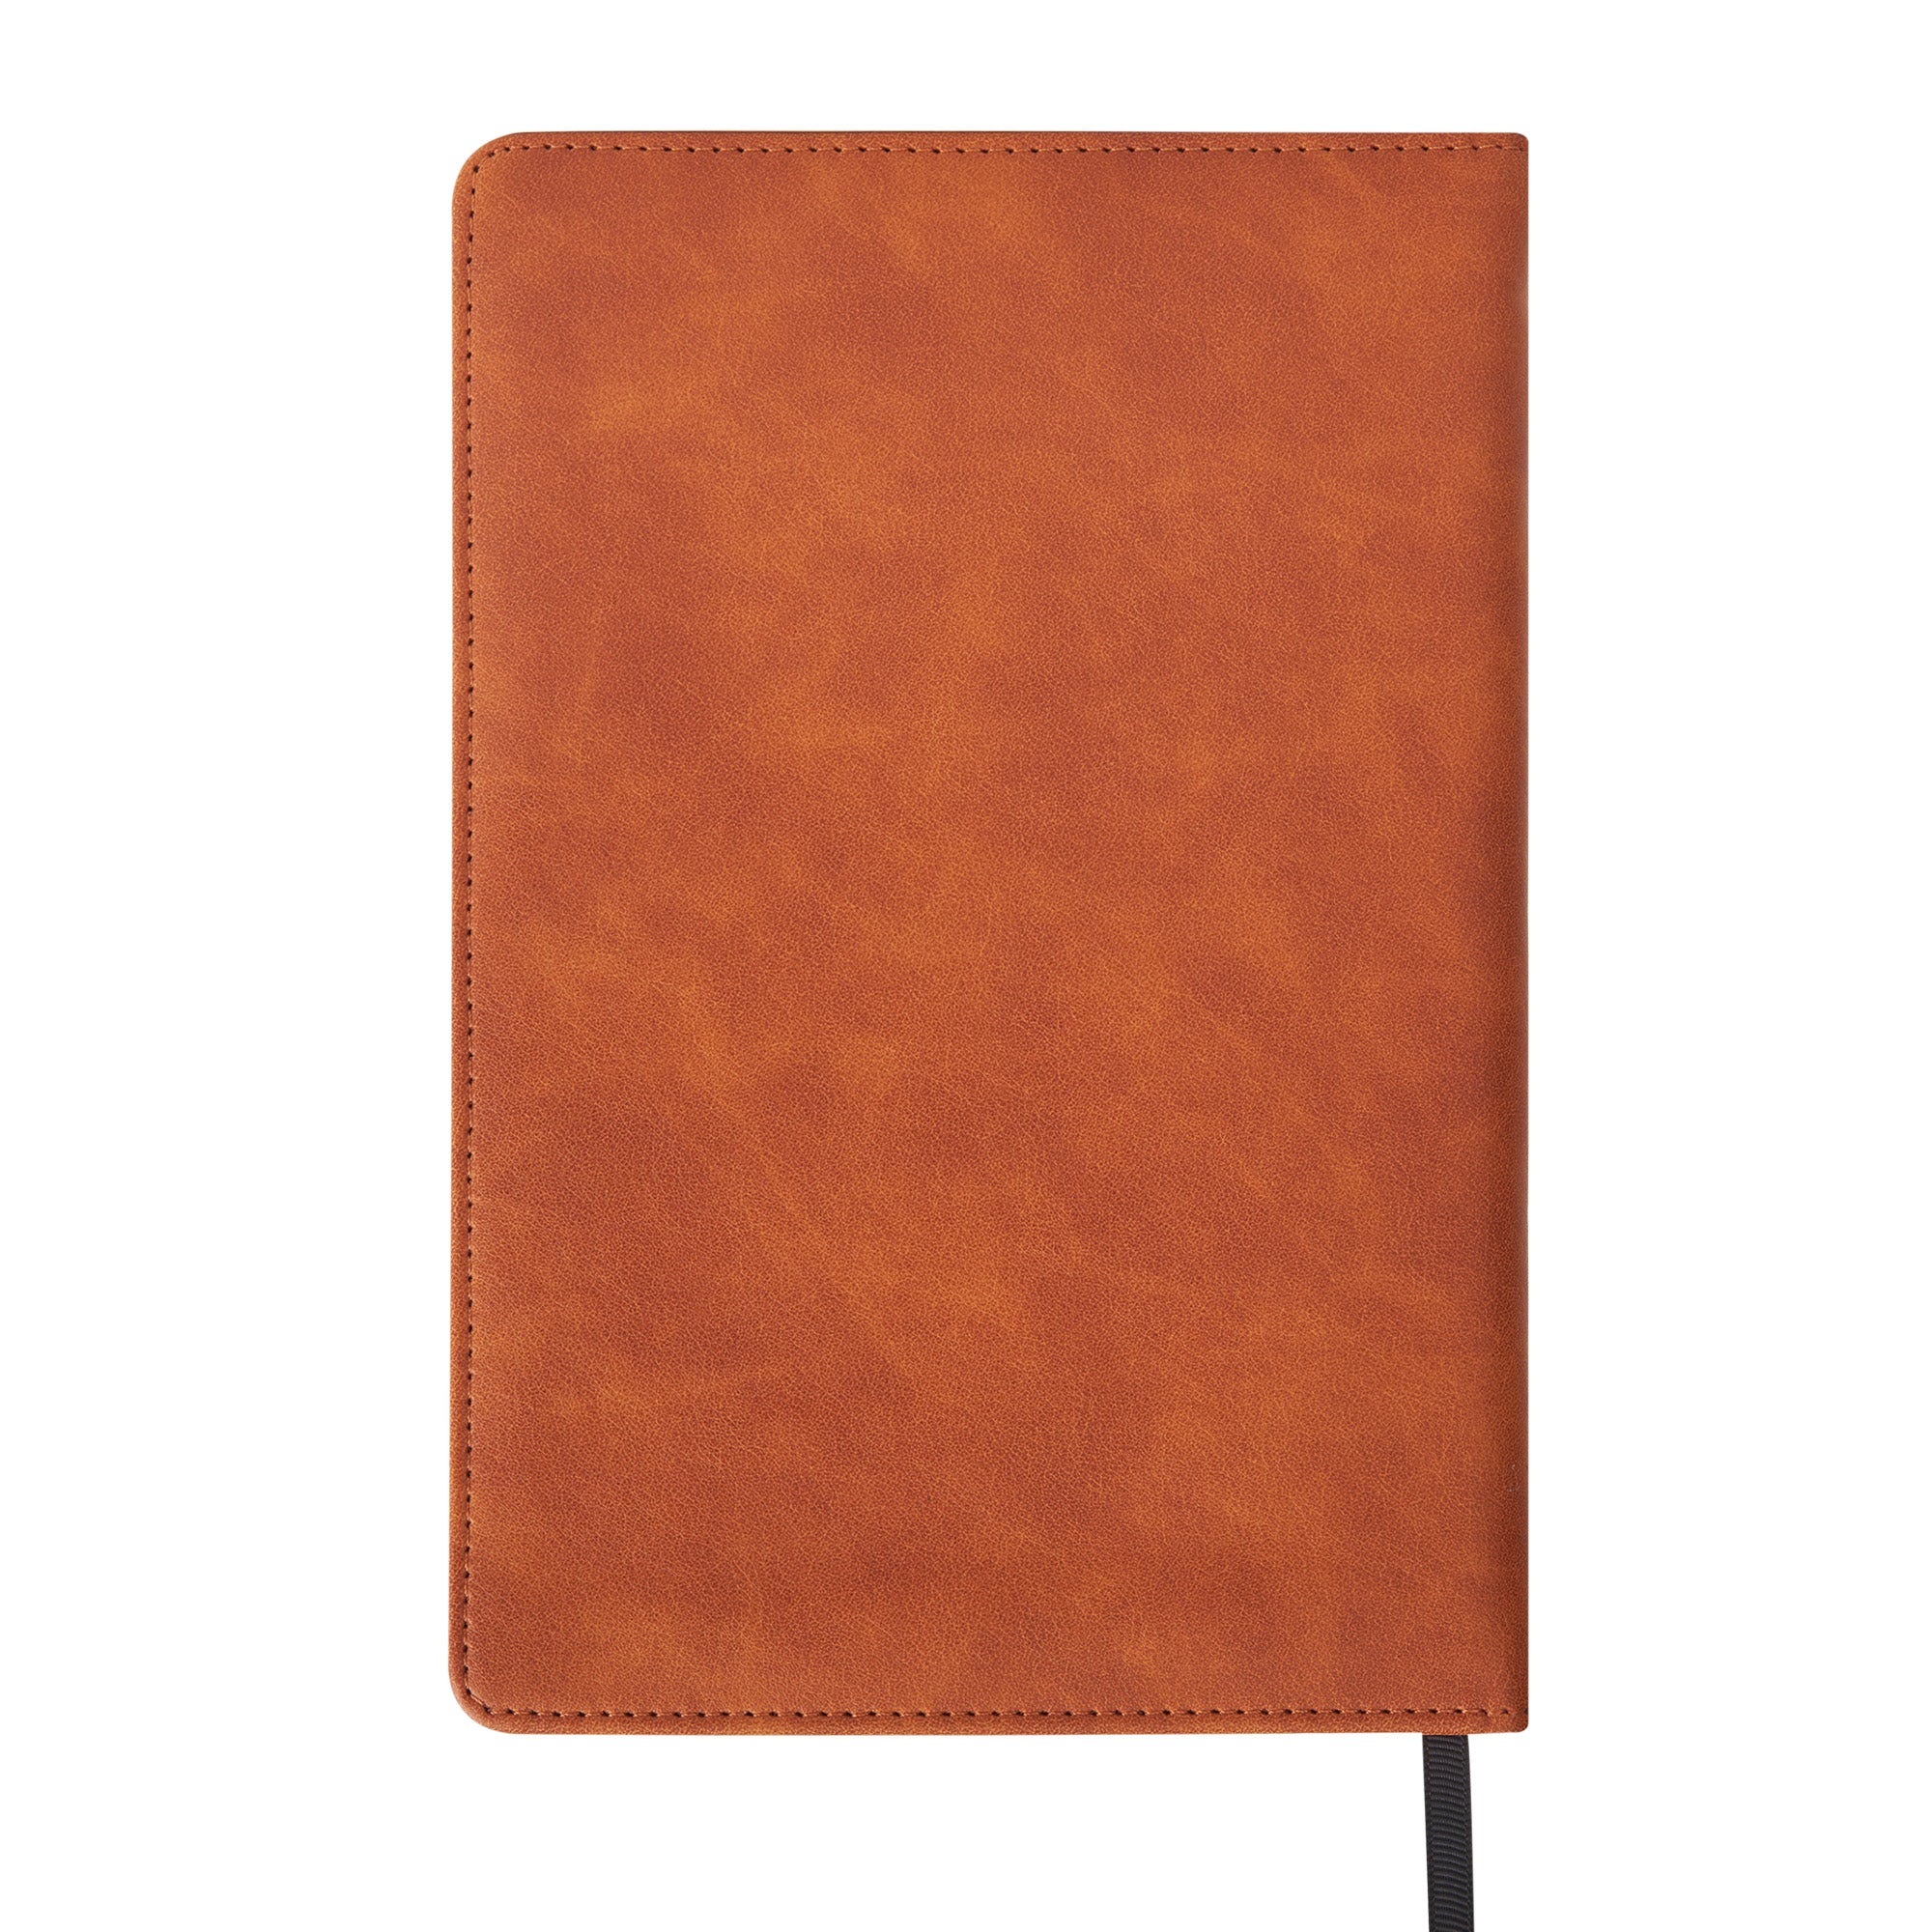 Graham A5 Hardbound Faux Leather Executive Notebook - Brown